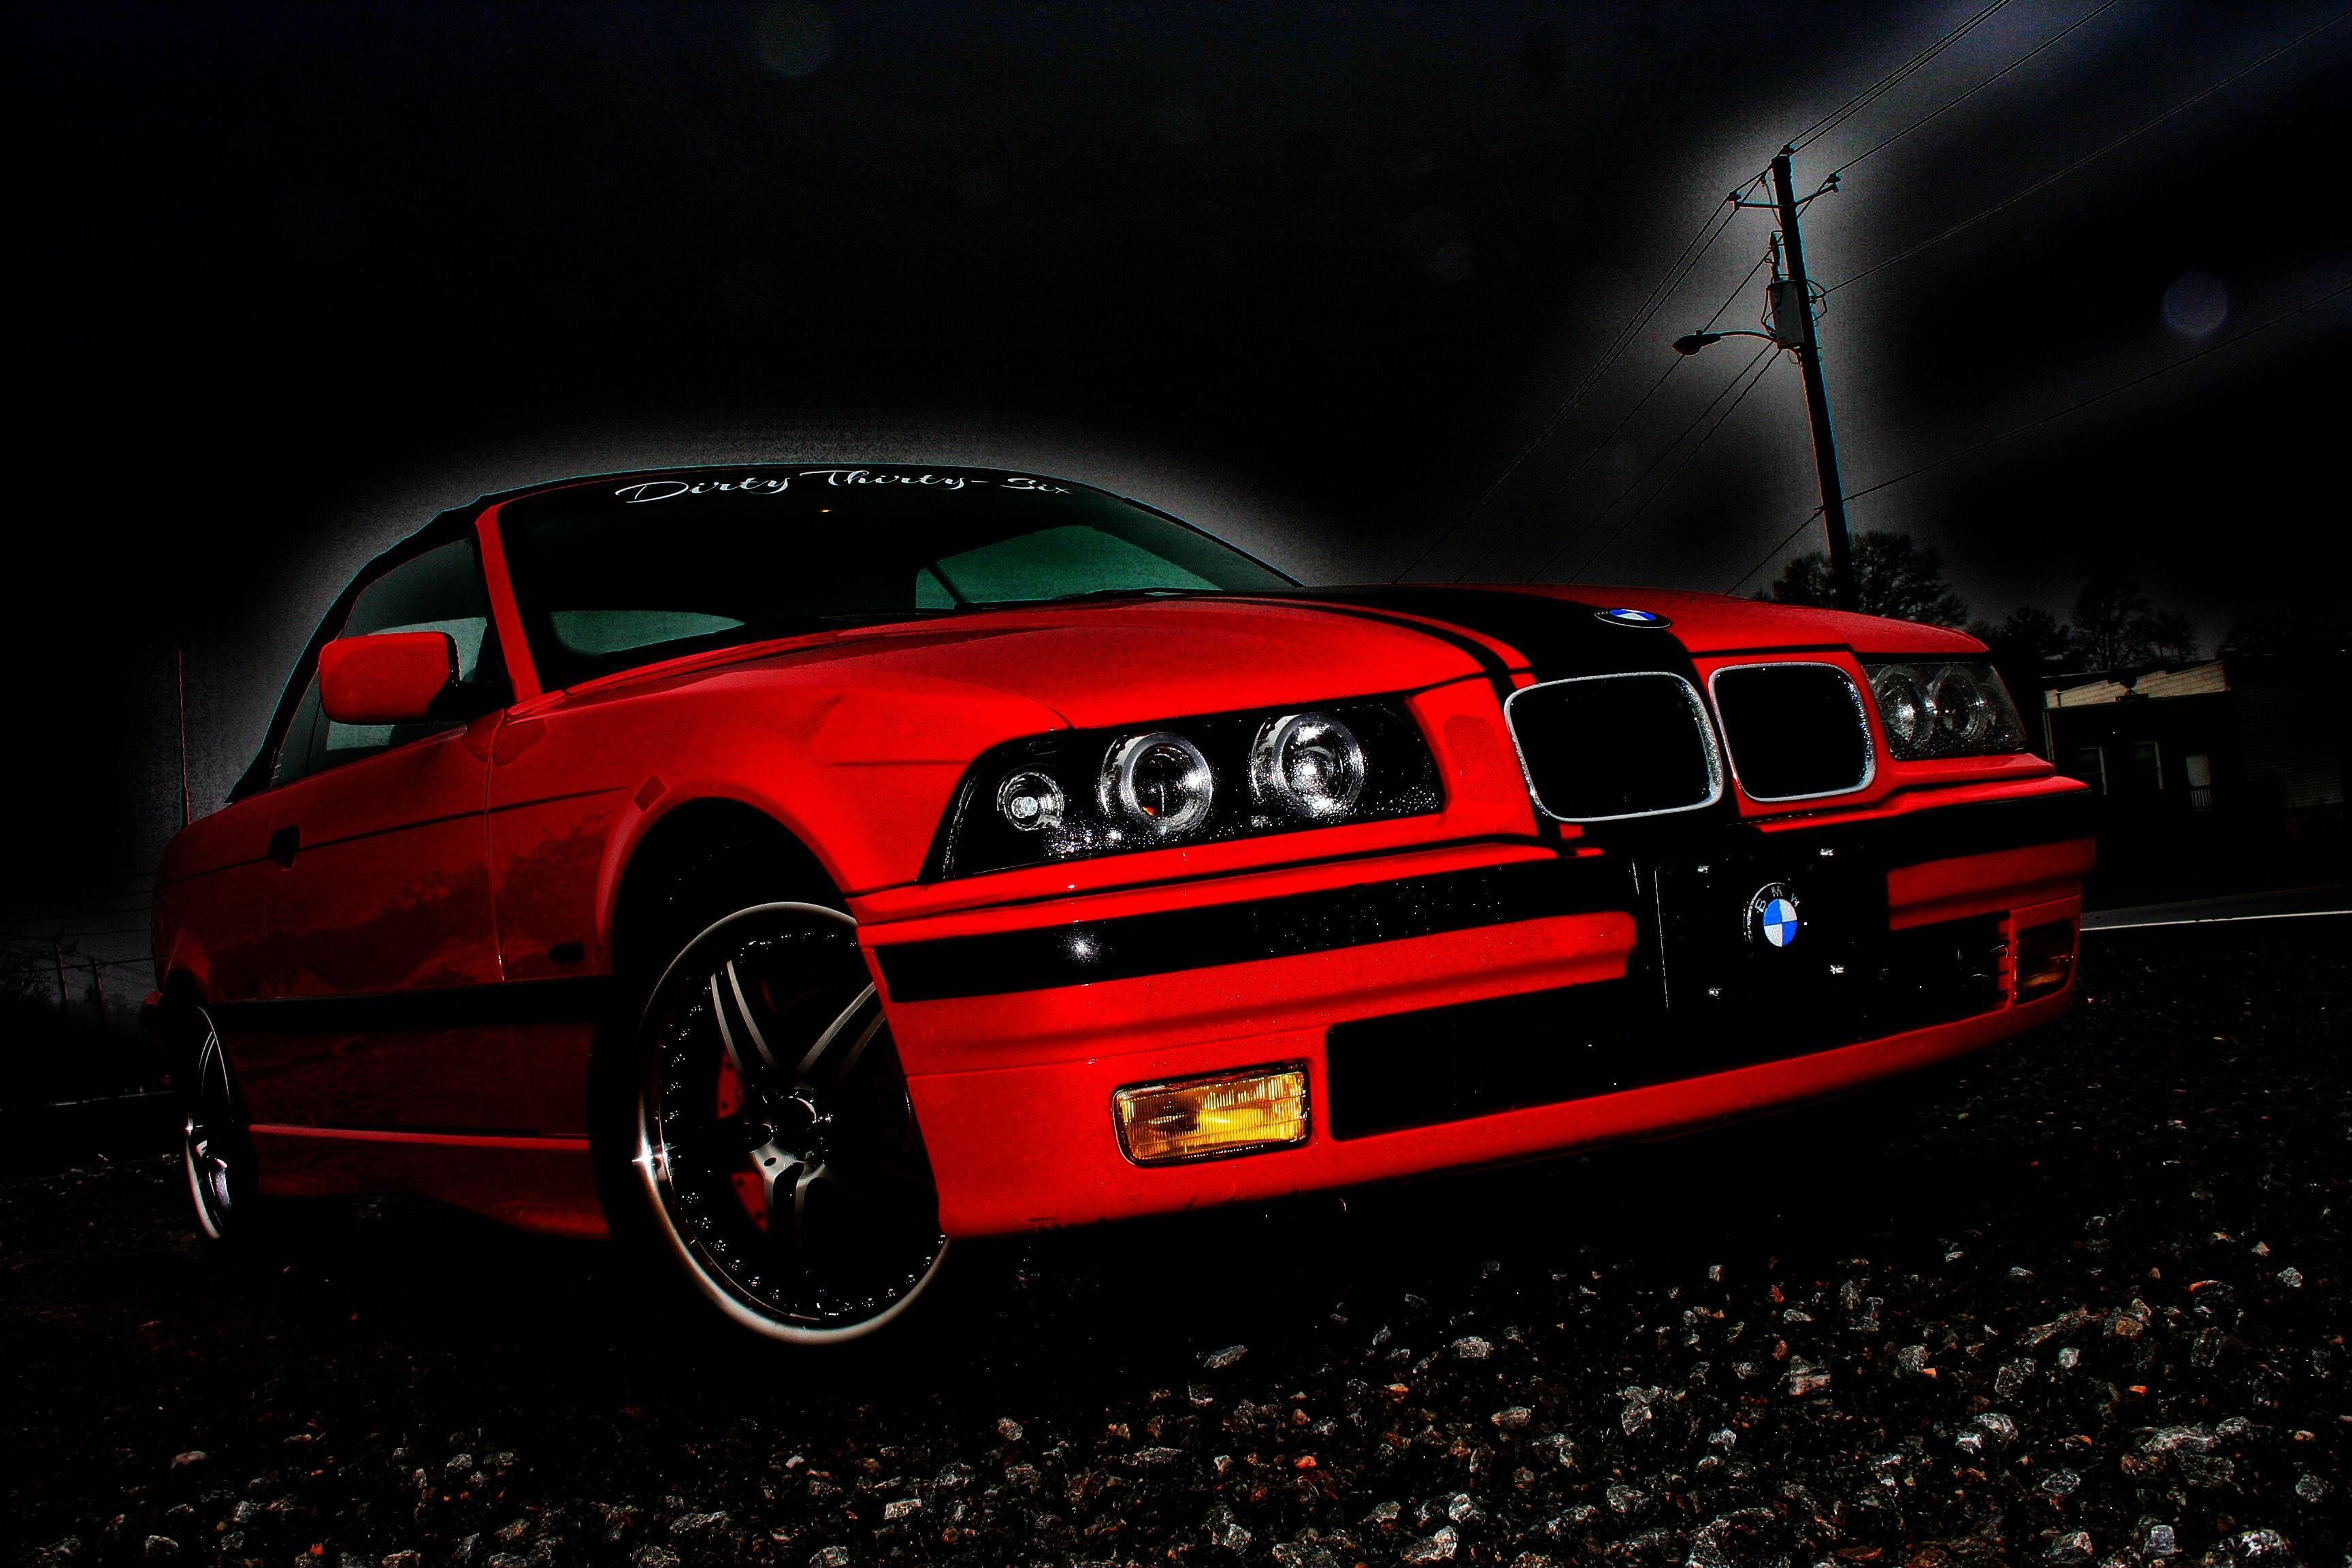 My lovely German lady, the beautiful BMW e36 HD Wallpaper From